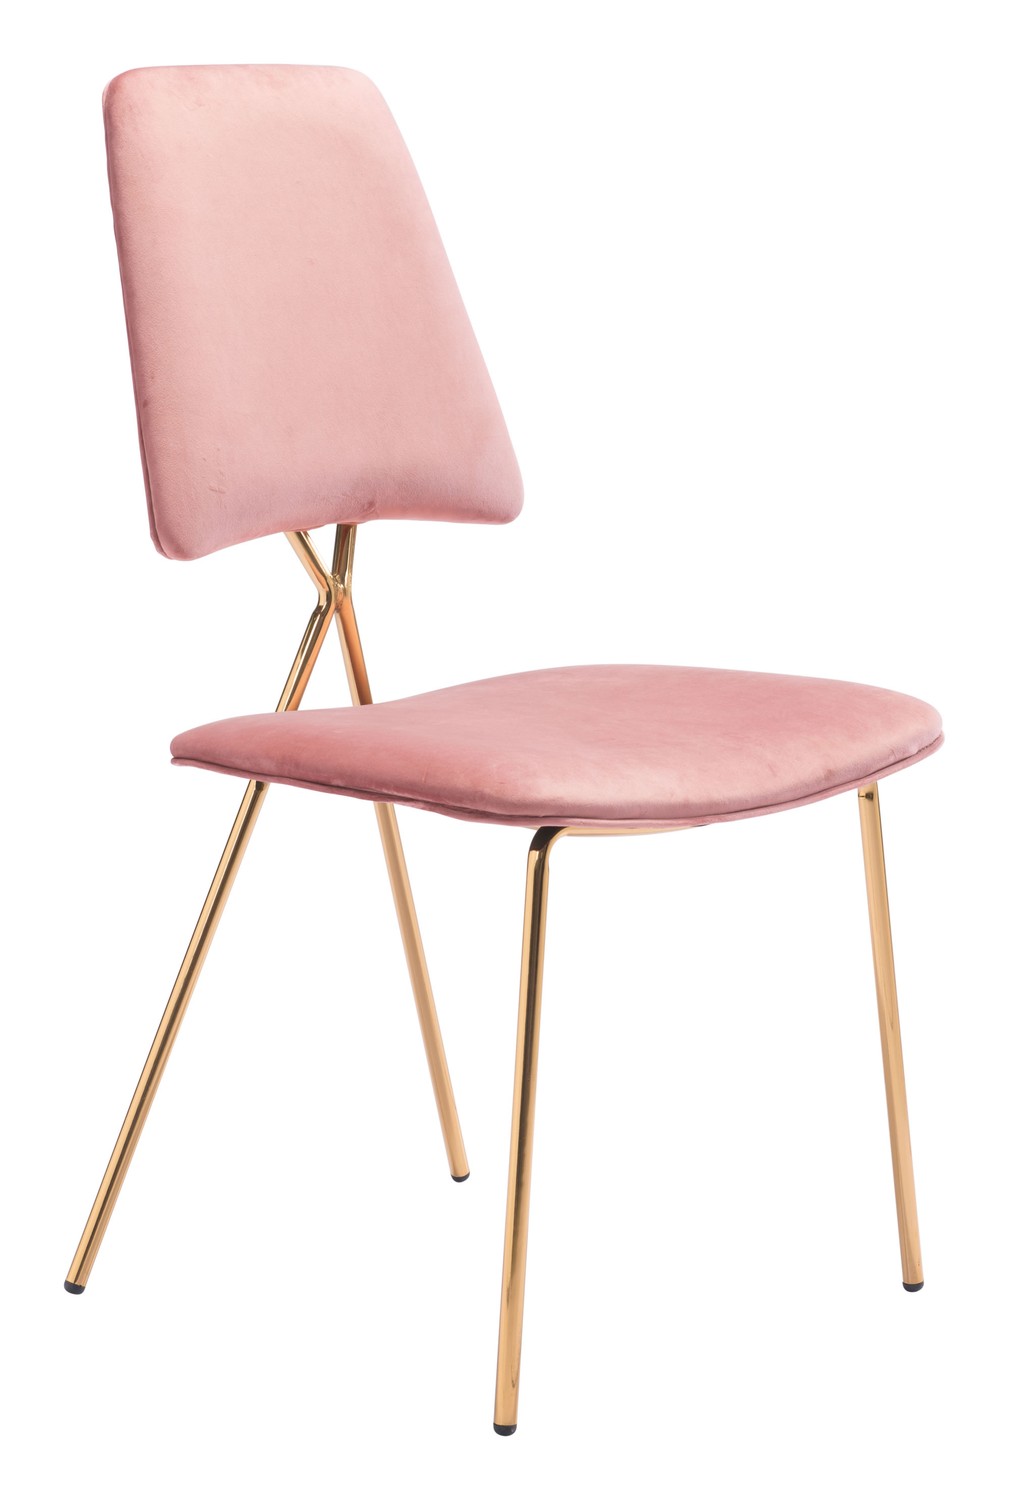 19.7" x 21.9" x 35.8" Pink & Gold, Velvet, Steel & Plywood, Chair - Set of 2